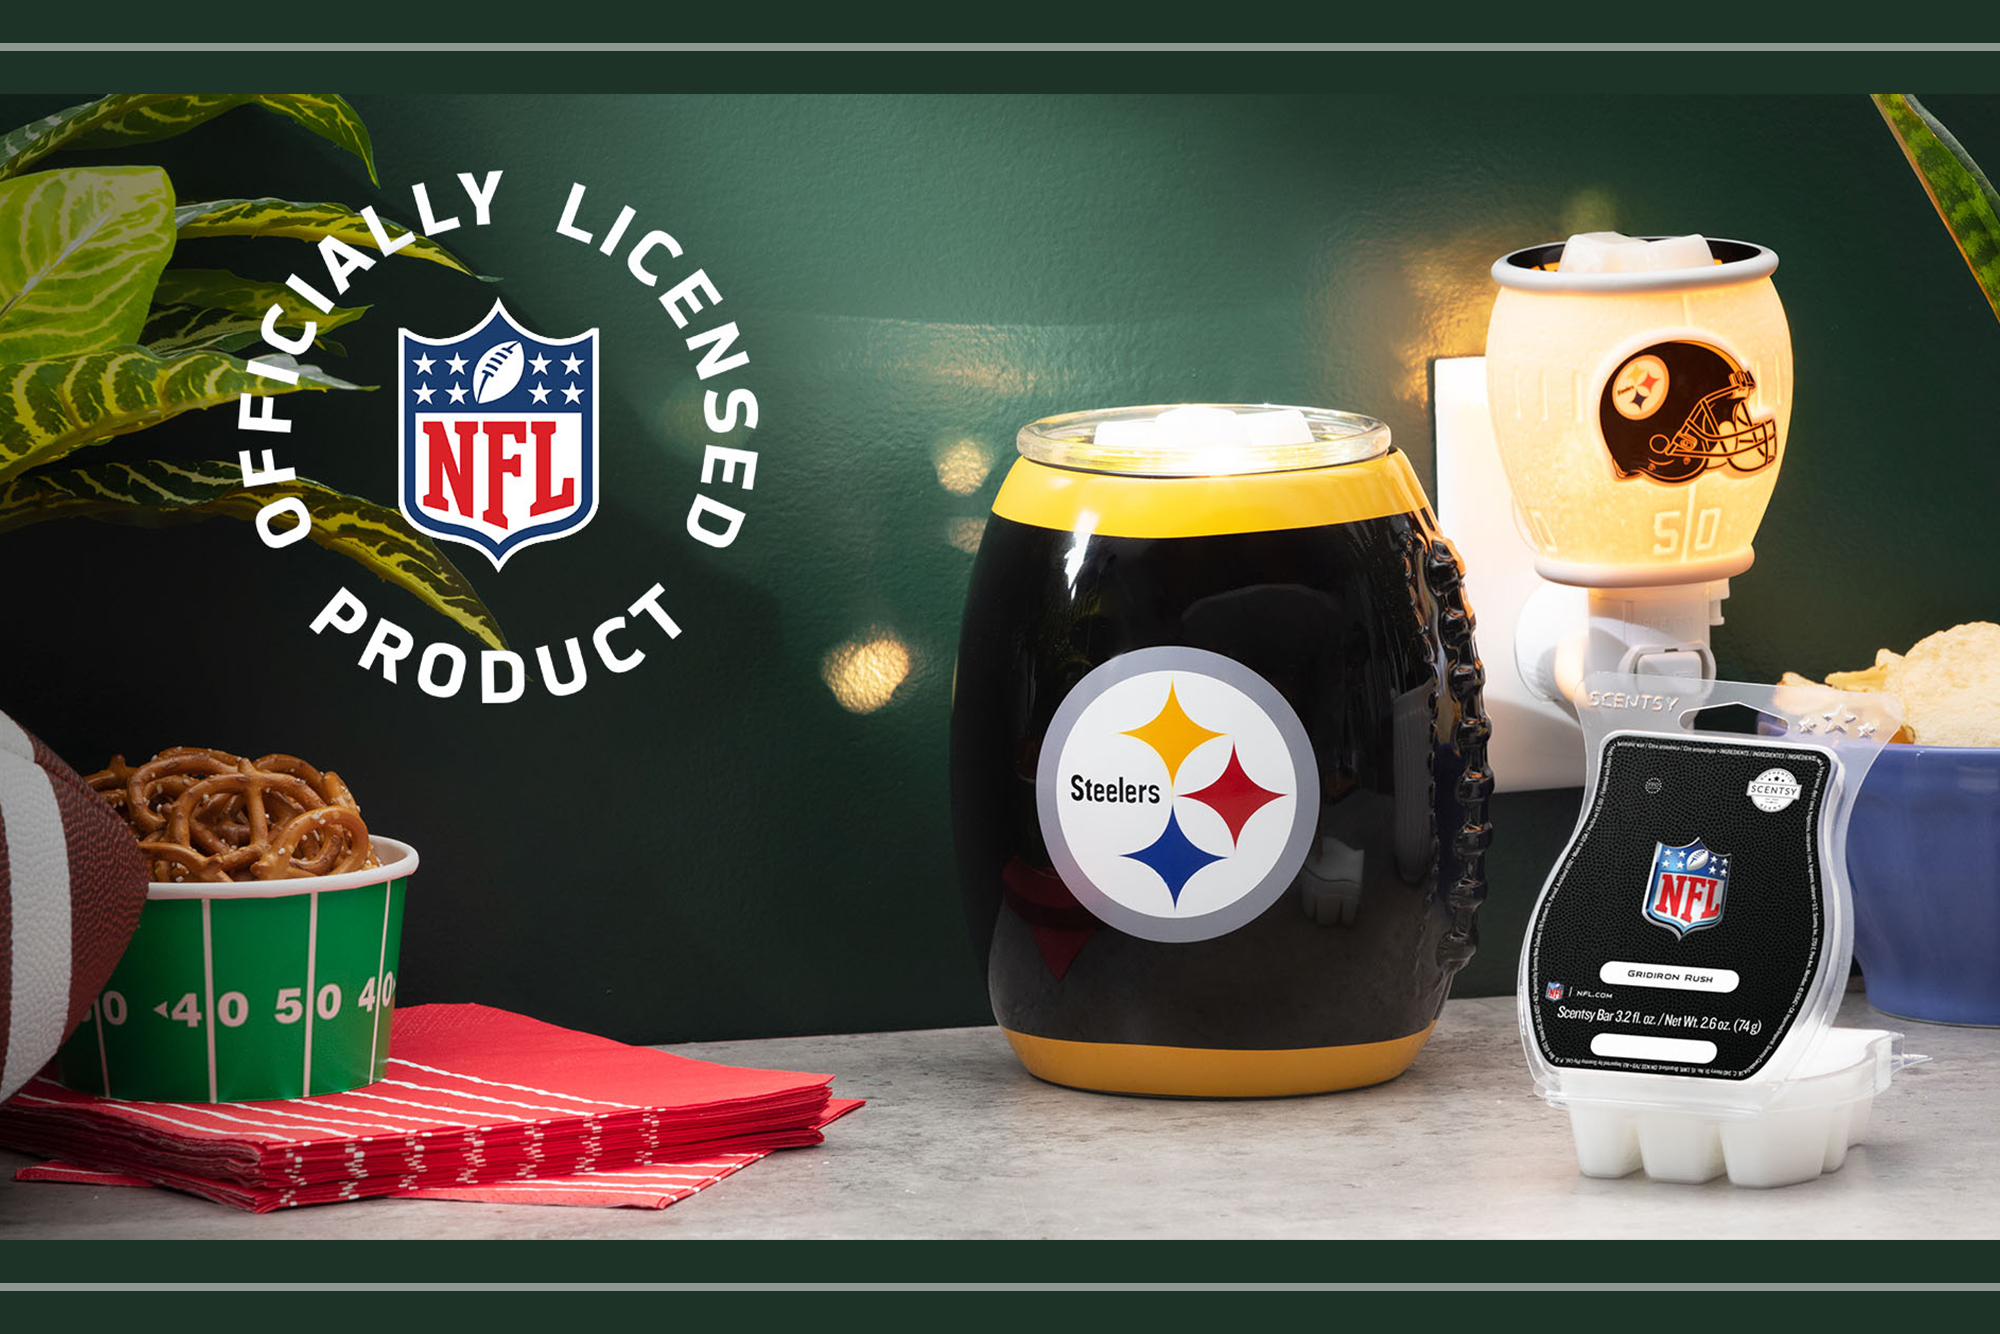 Scentsy's NFL collection featuring the Steeler's products and Gridiron Rush fragrance